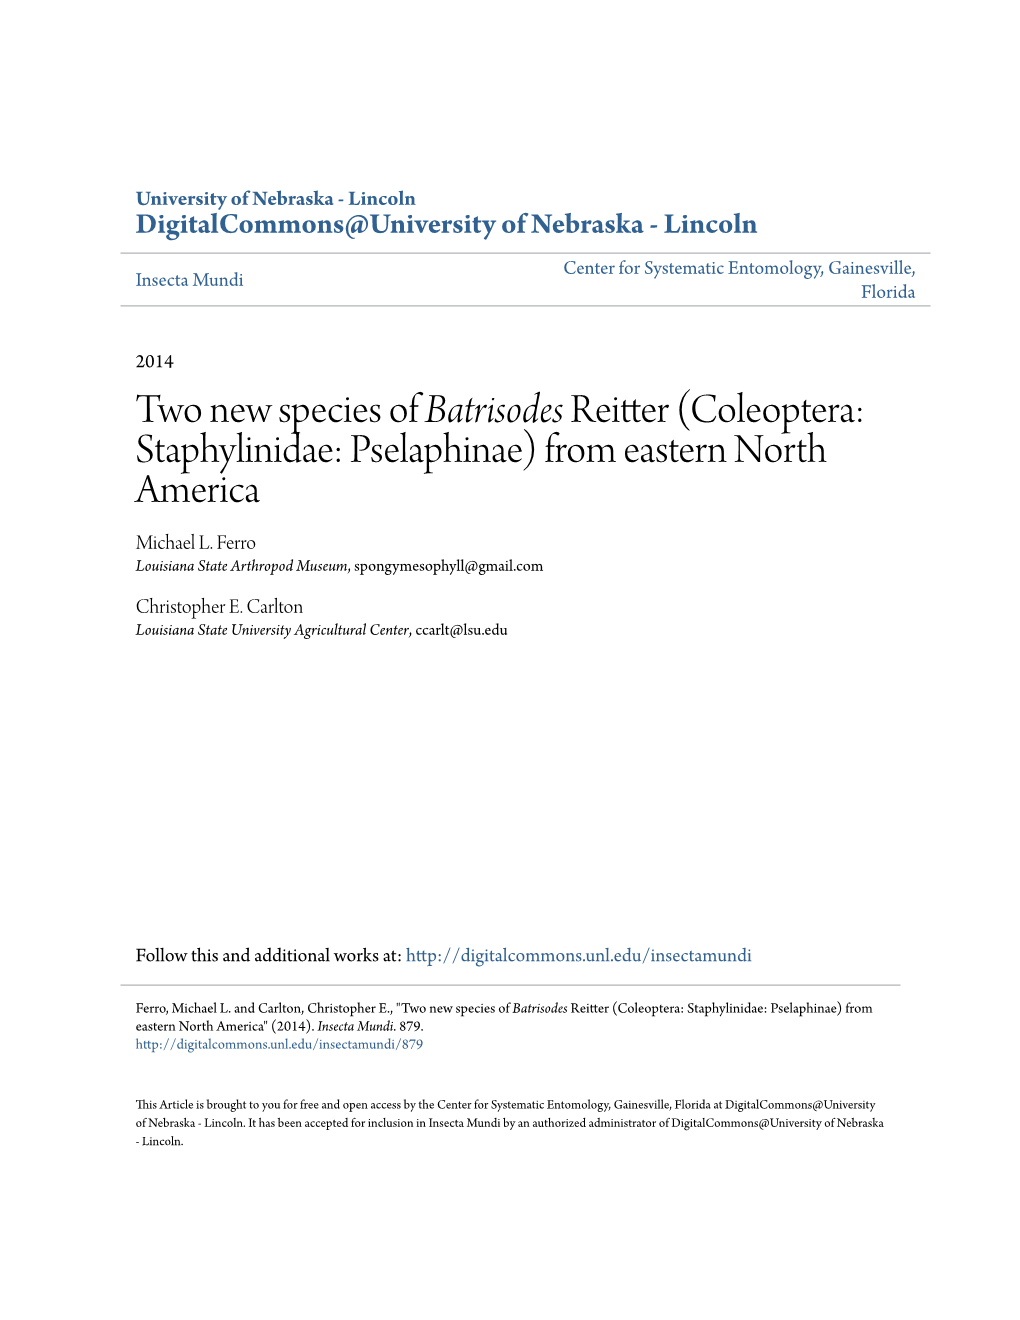 Two New Species of Batrisodes Reitter (Coleoptera: Staphylinidae: Pselaphinae) from Eastern North America Michael L